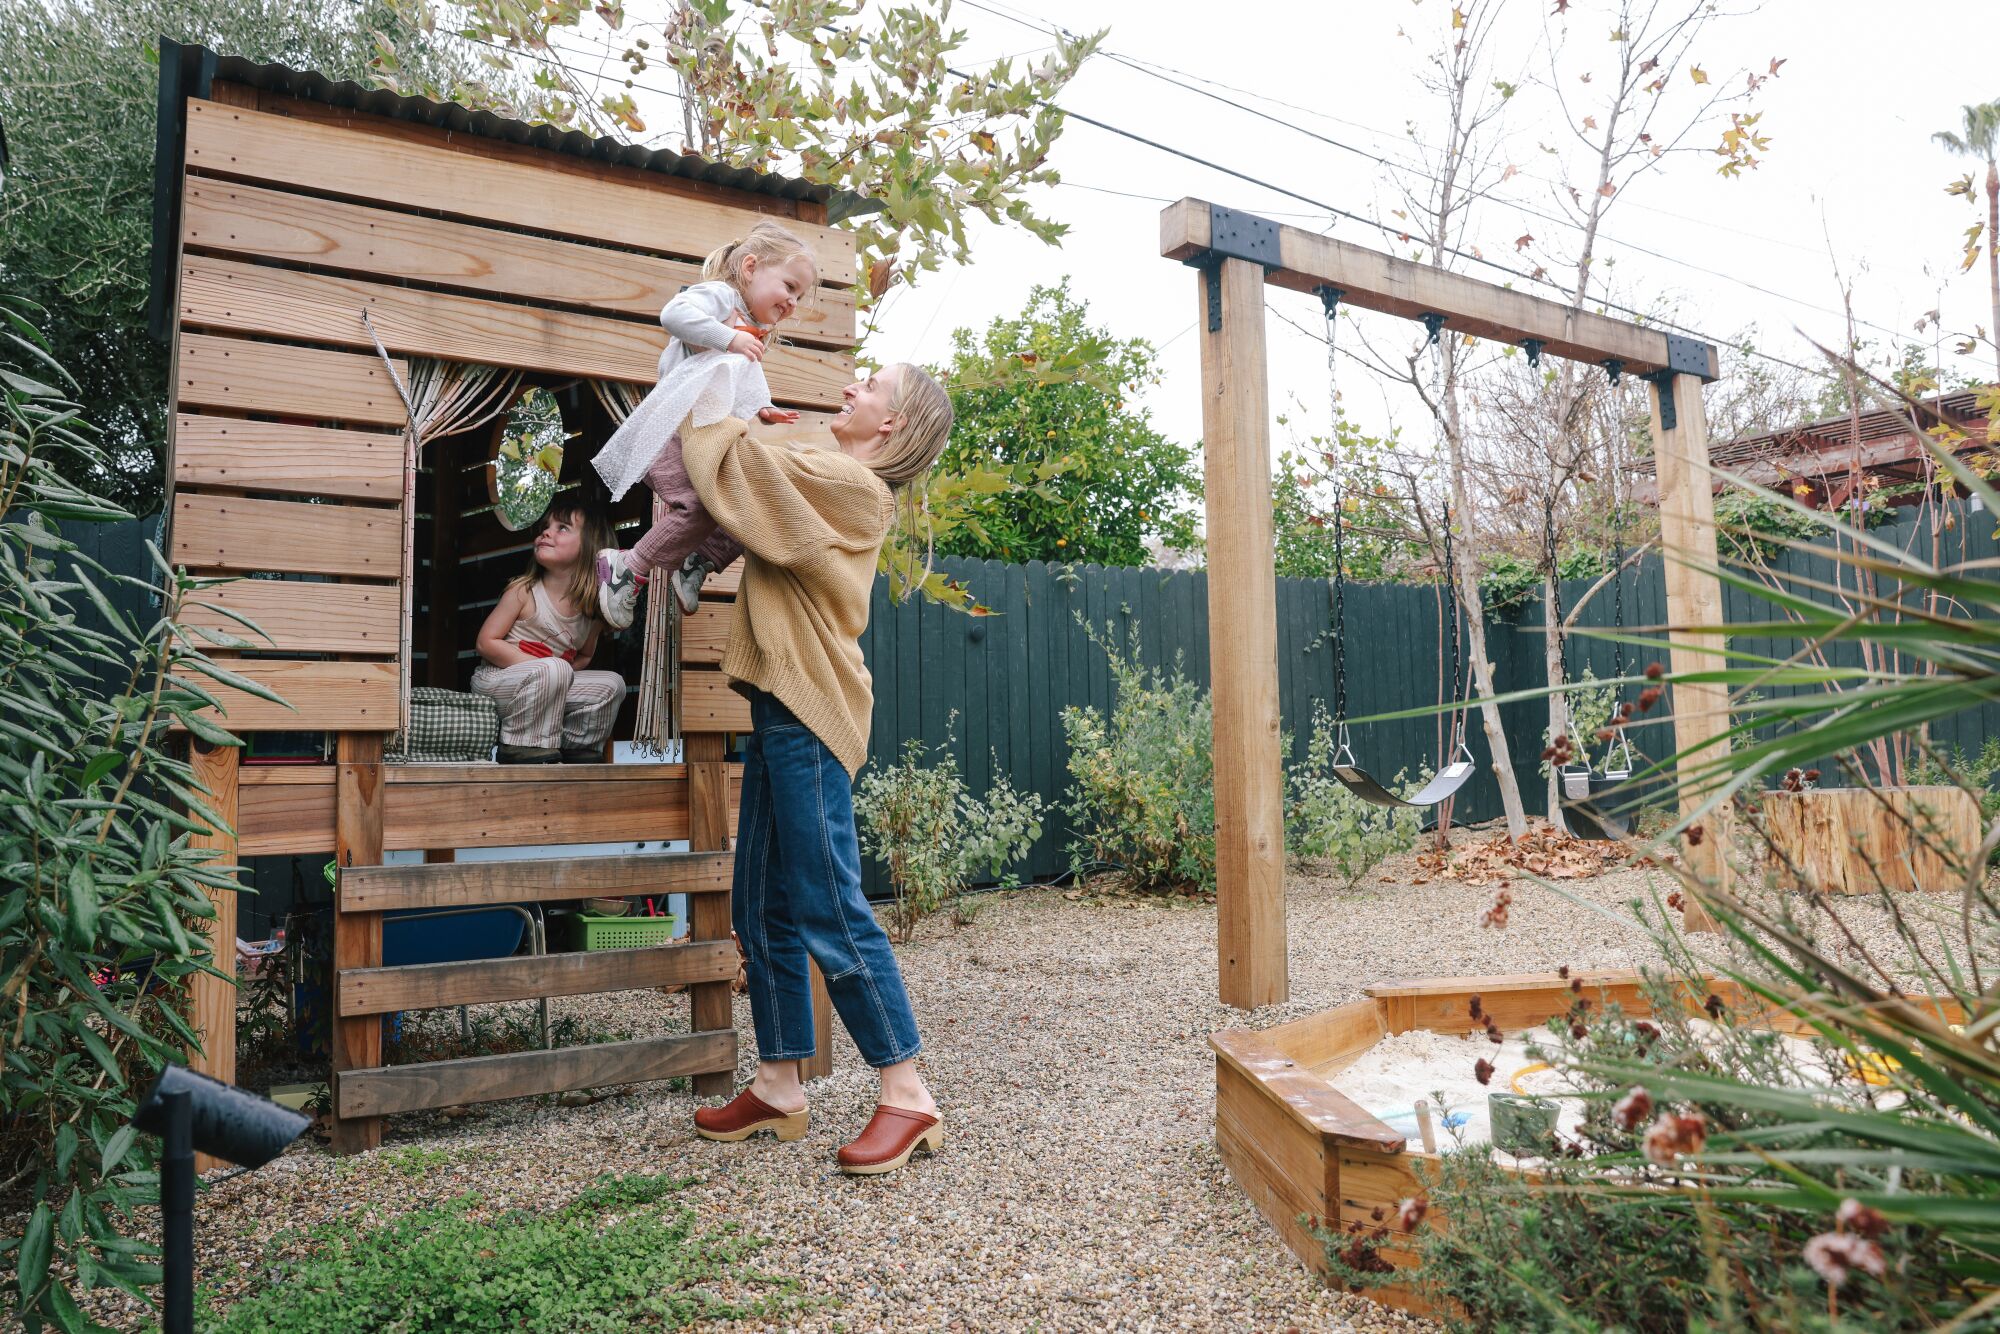 A mother lifts her daughter into an outdoor wooden playhouse.